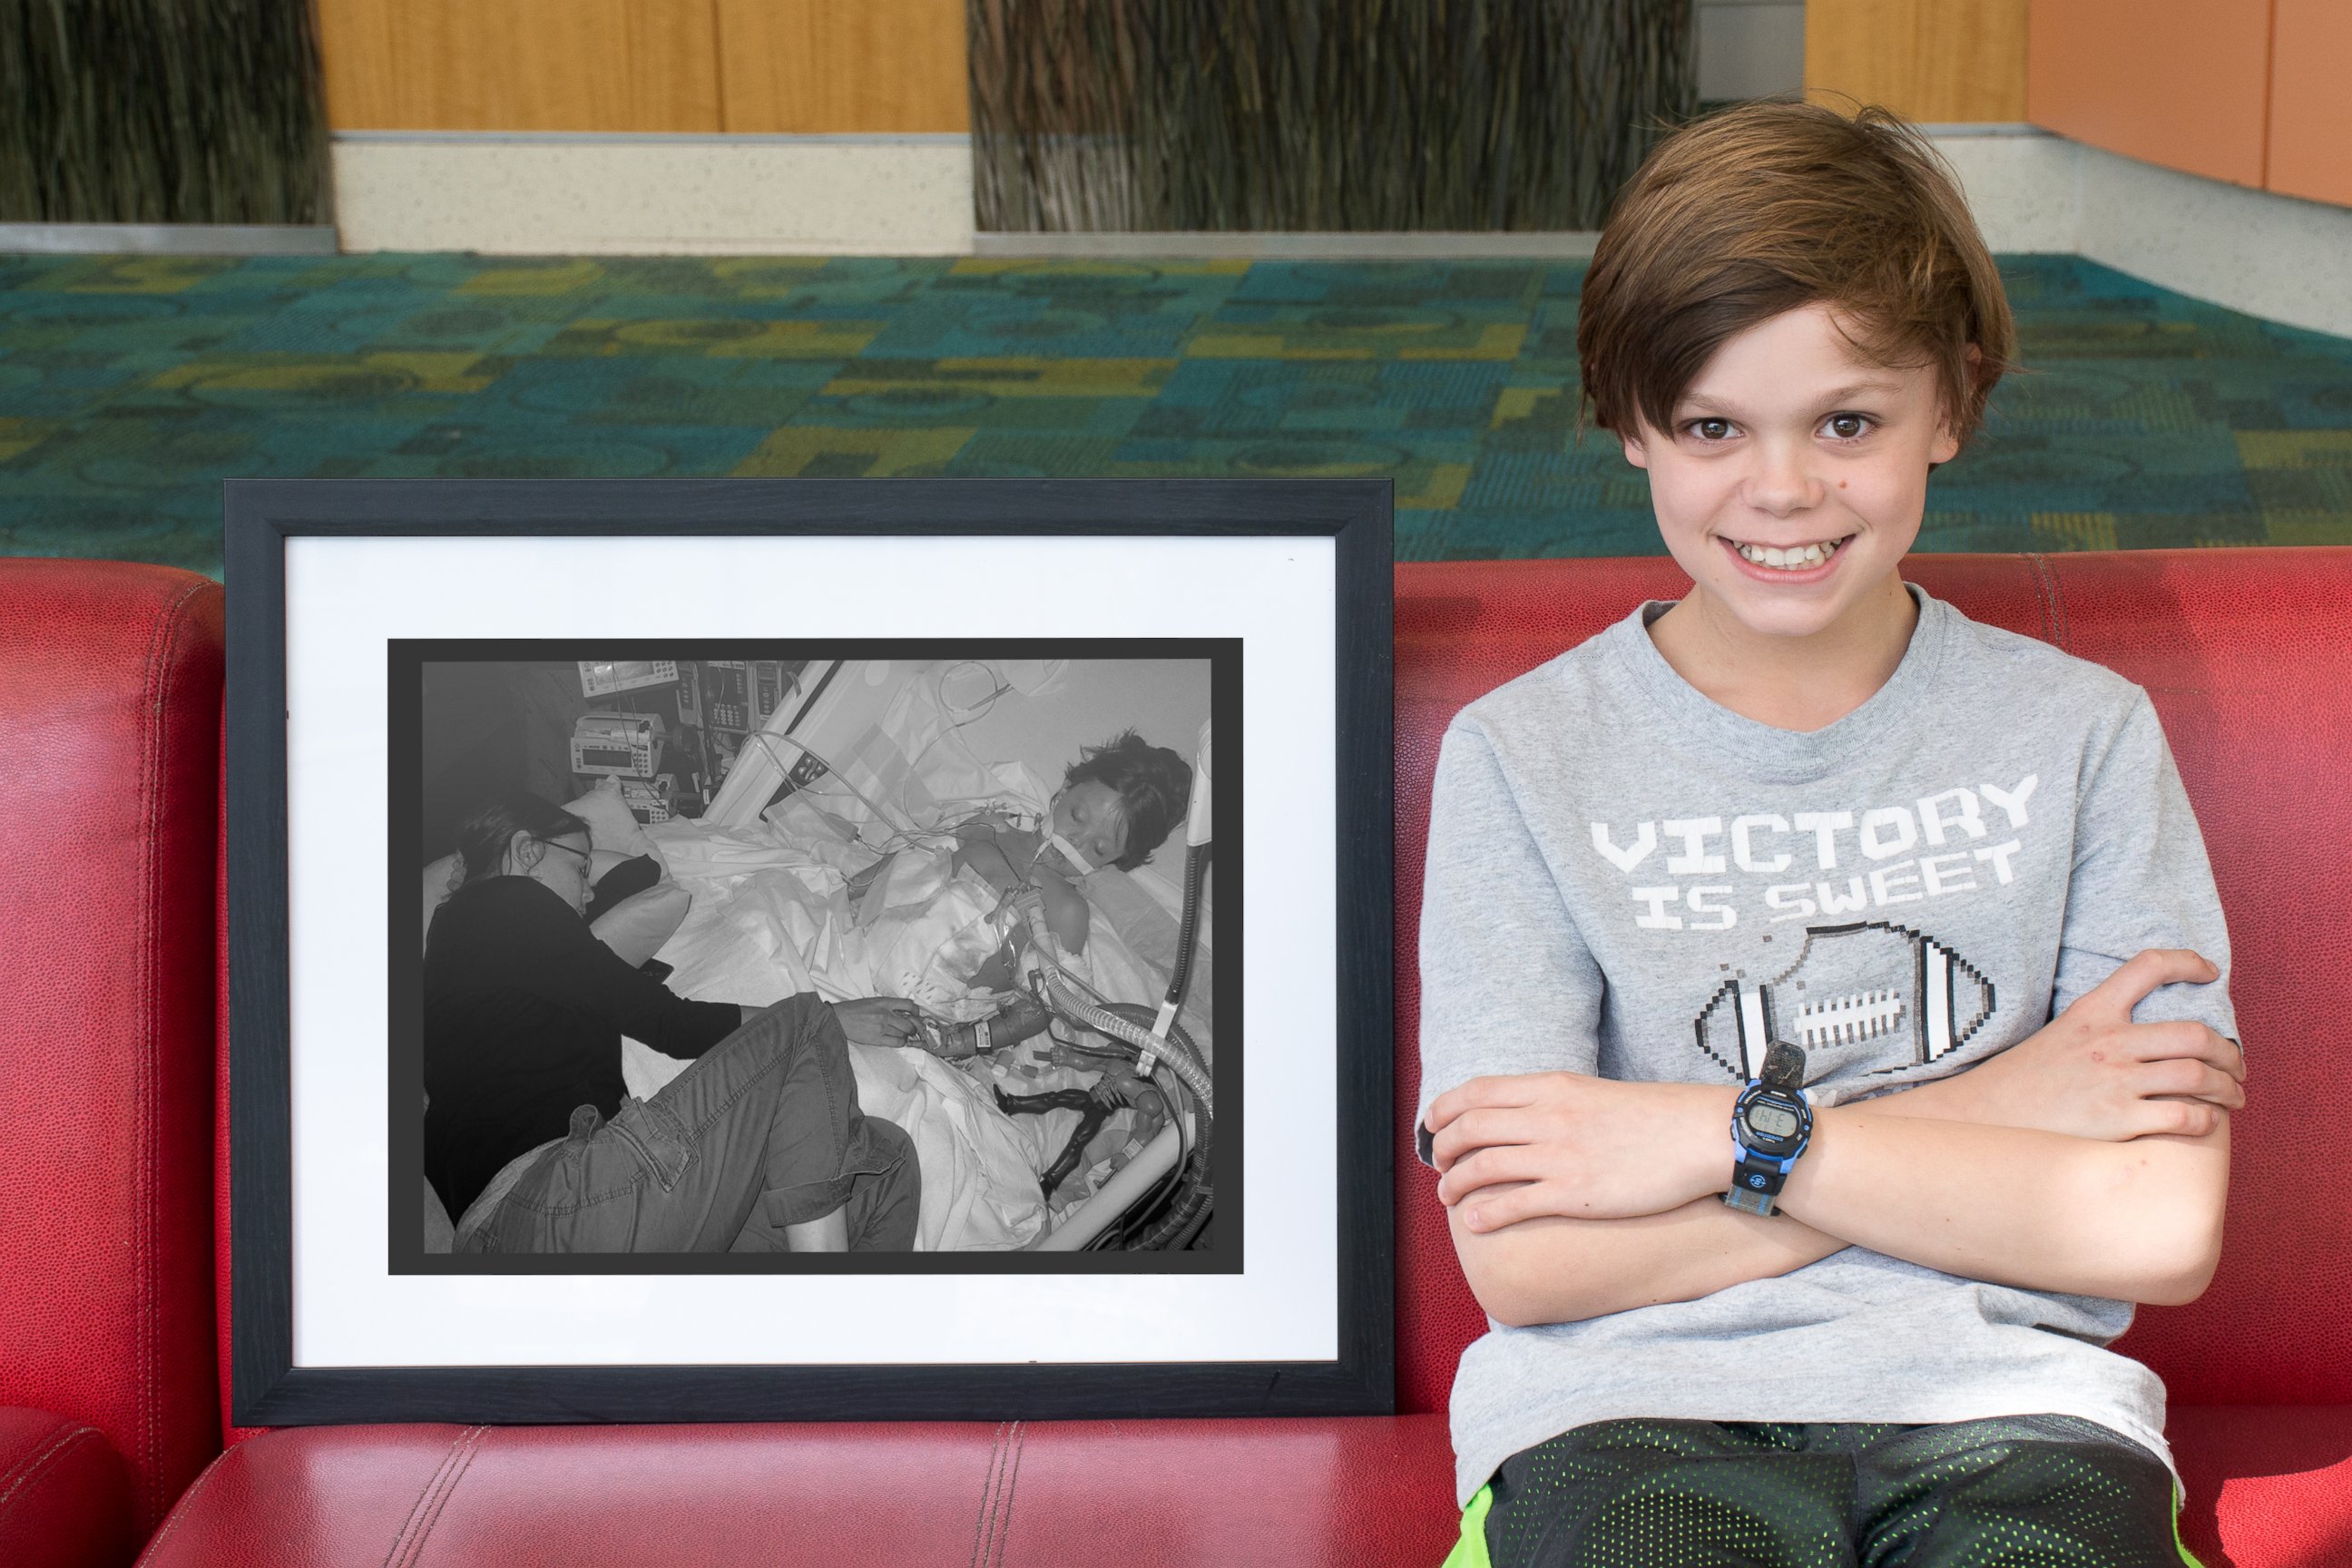 PHOTO: Jonah, a liver recipient, is pictured in an undated photo.